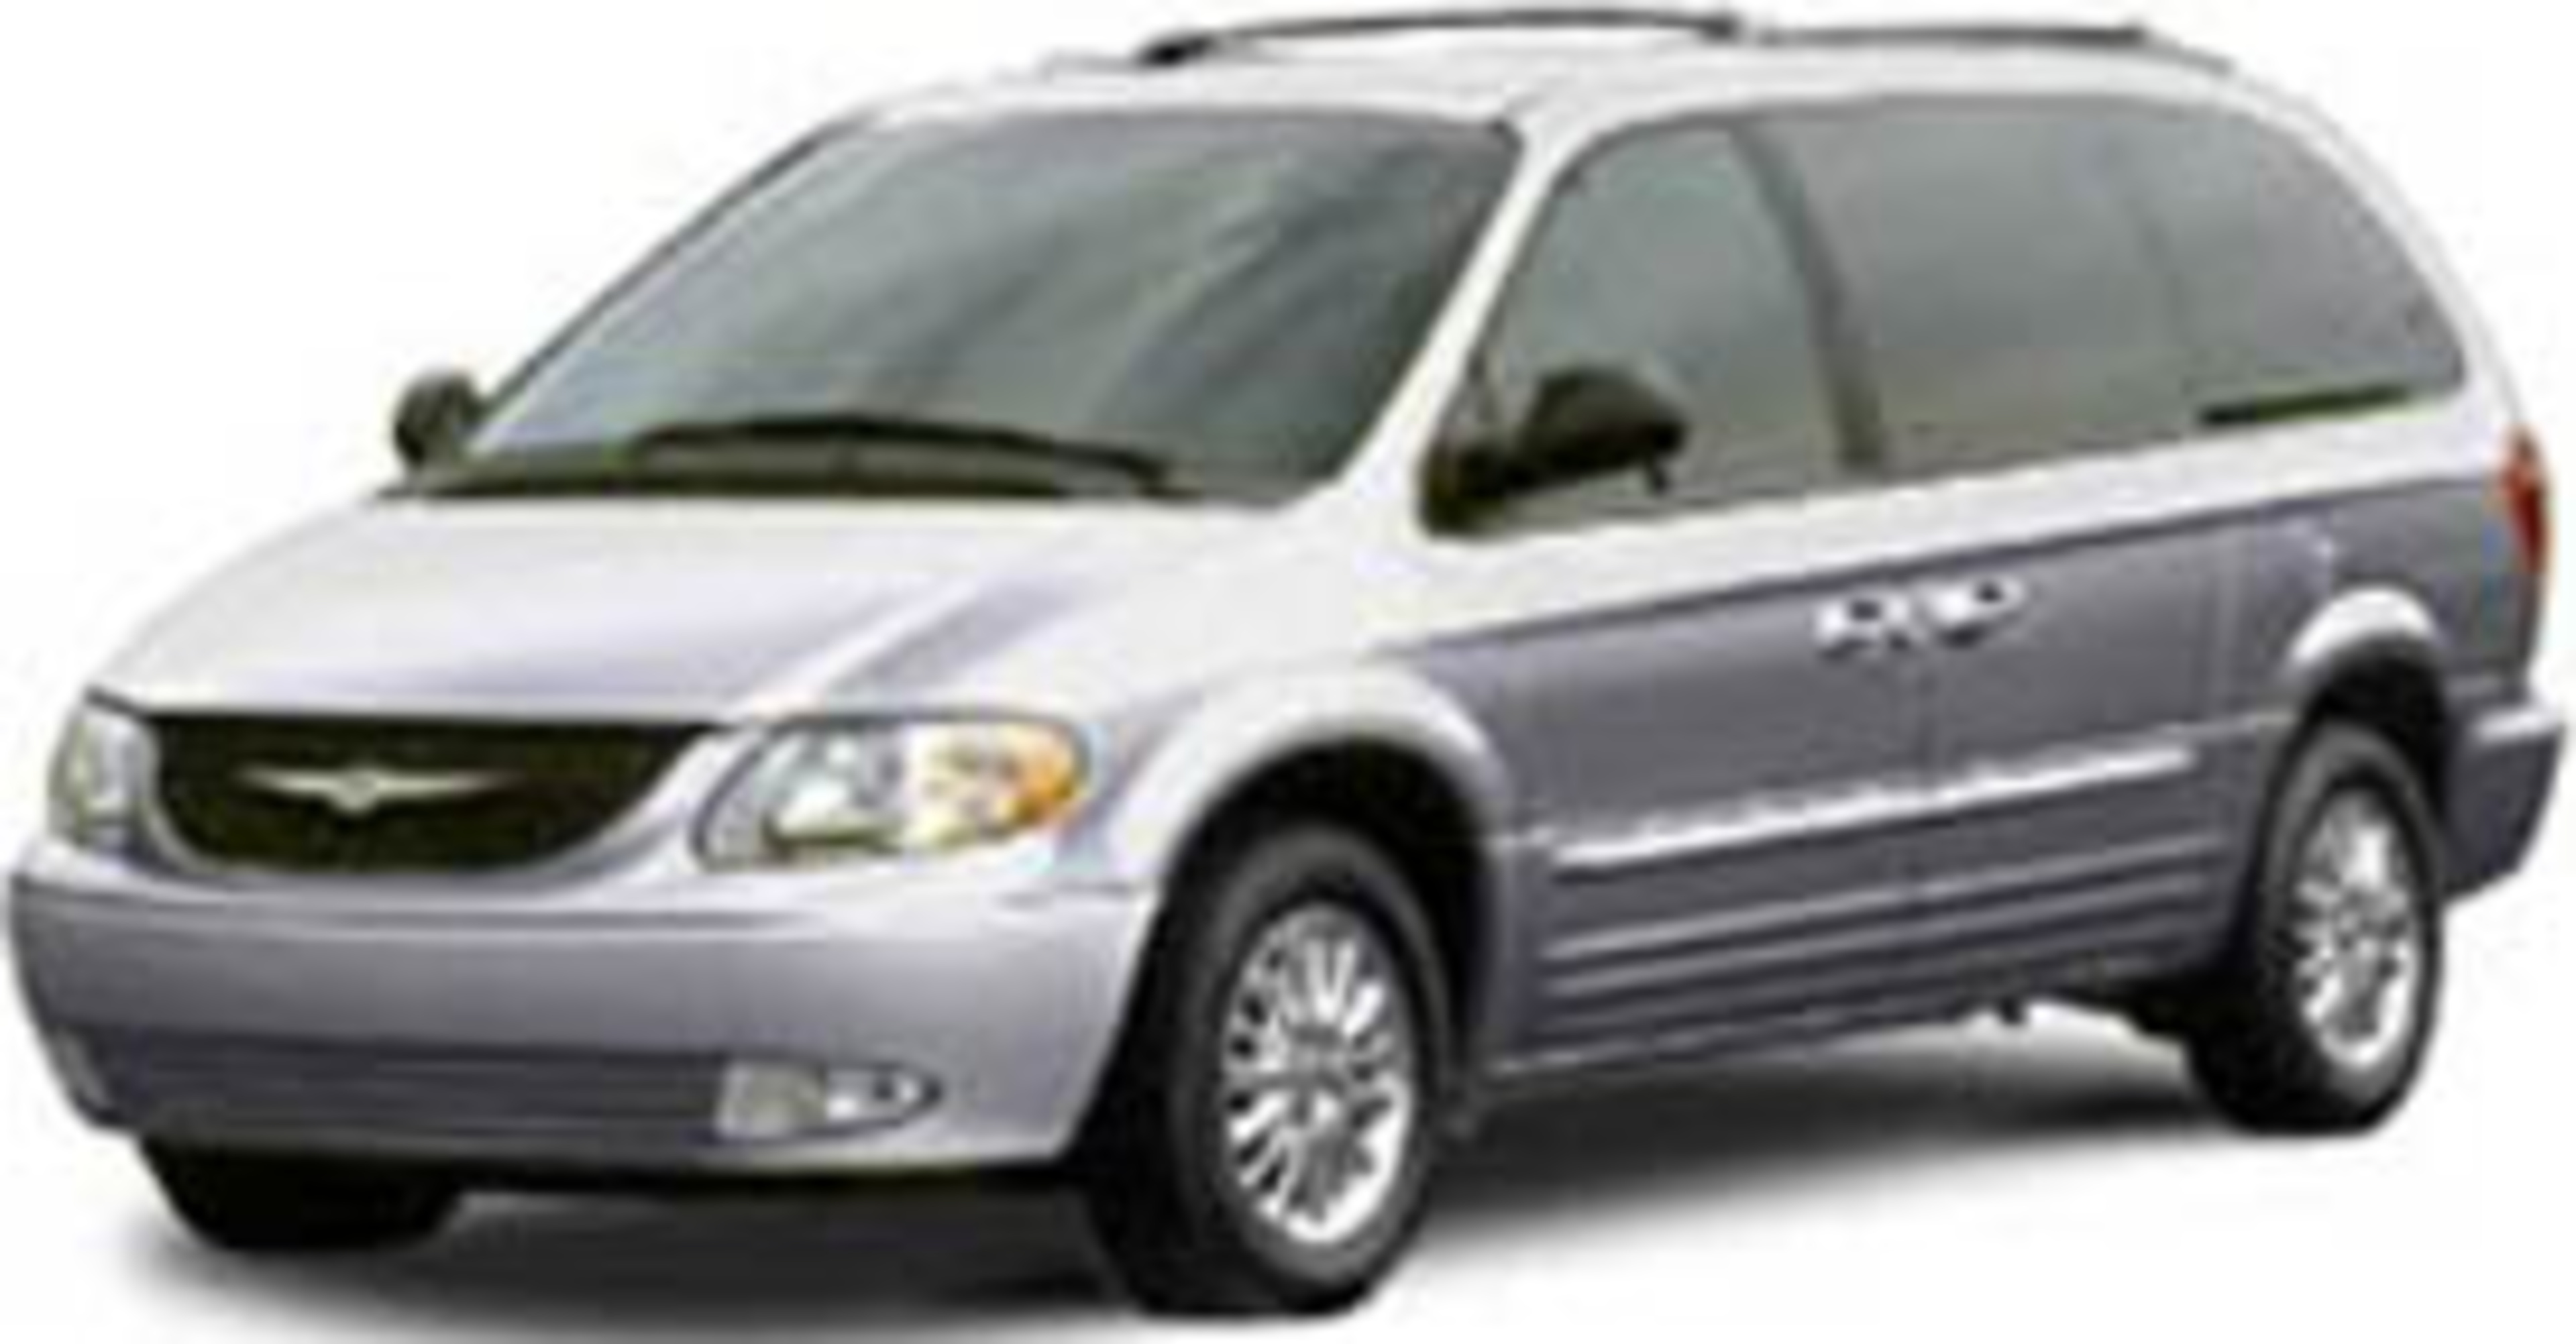 2003 Chrysler Town & Country Service and Repair Manual